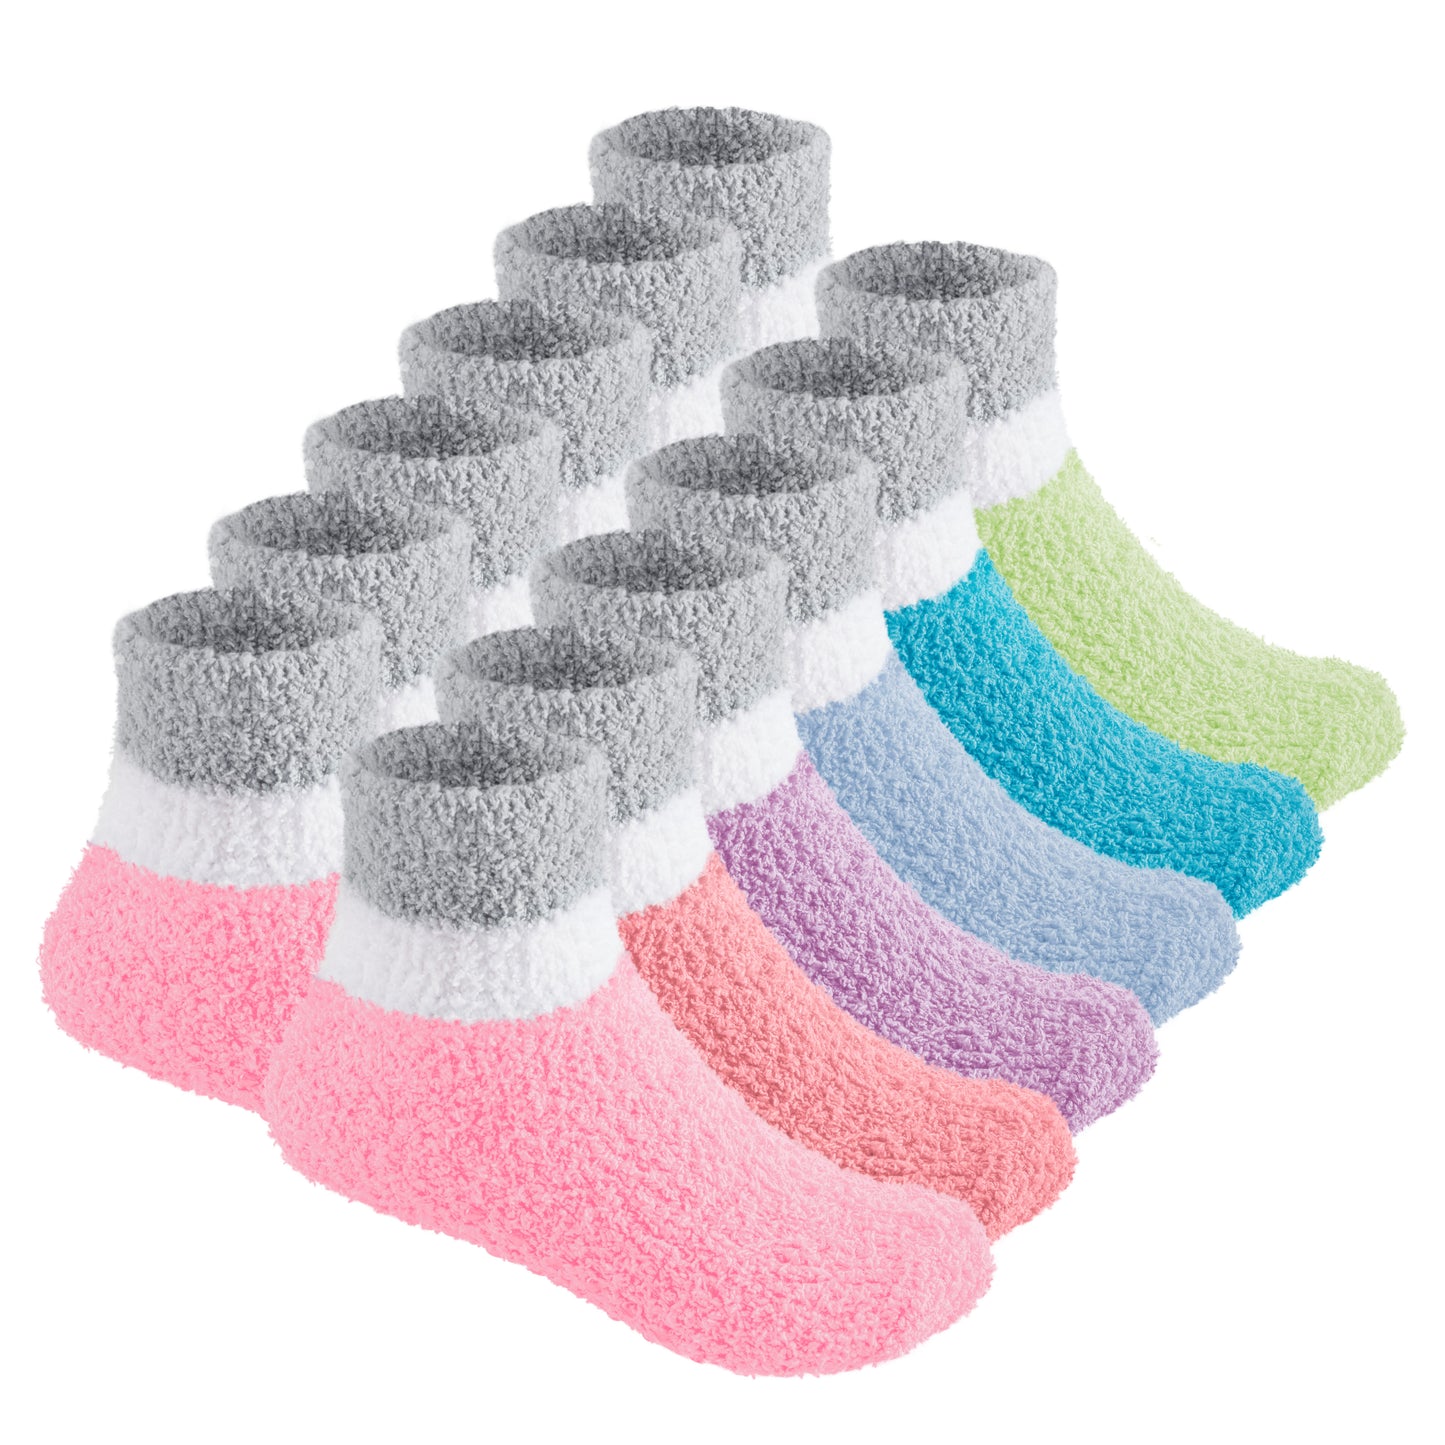 Fuzzy Socks for Kids - 6 Pairs